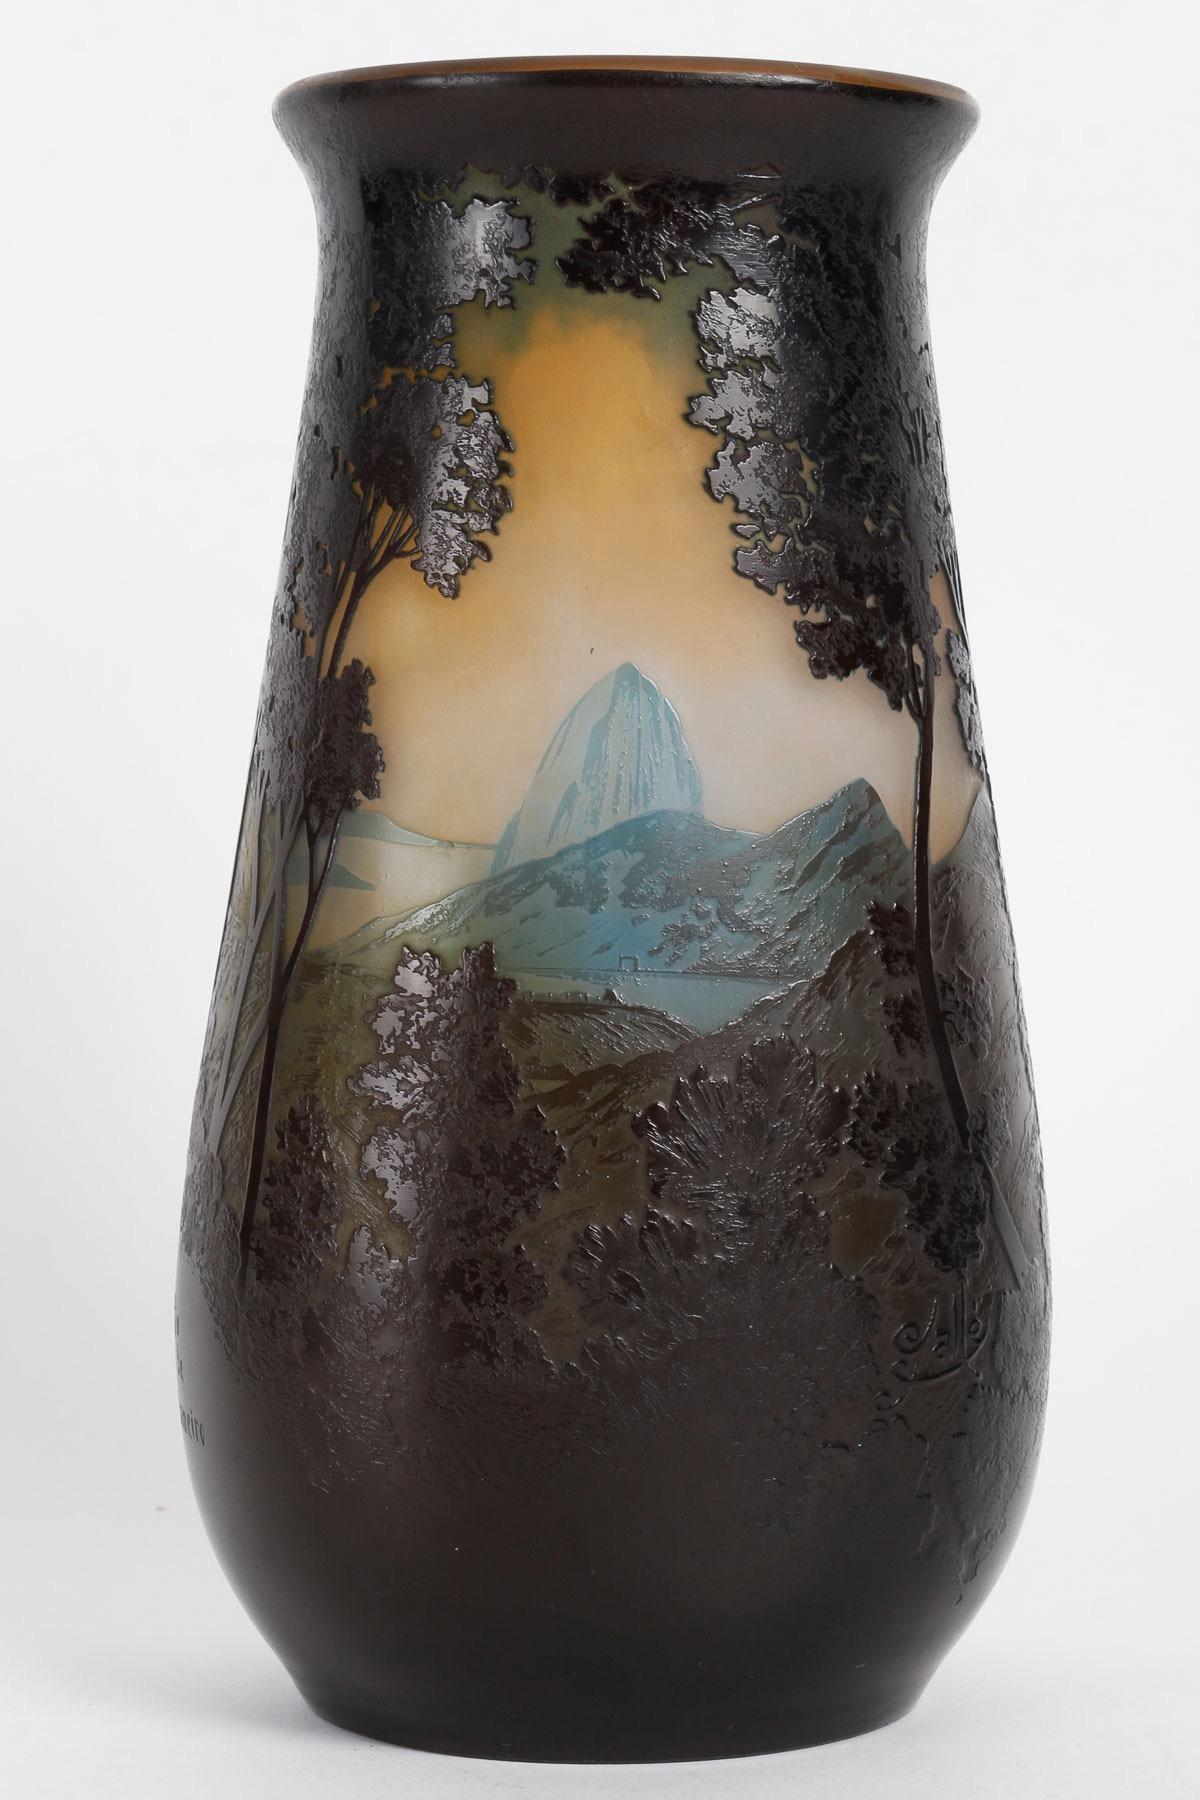 Emile Gallé (1846-1904)
French Art Nouveau Caméo Glass Vase « Rio de Janeiro » circa 1900

Rare Galle French cameo glass vase in dark blue over yellow 
Rio De Janeiro design showing the mountains, forest and the city coastline, 
Engraved on the side